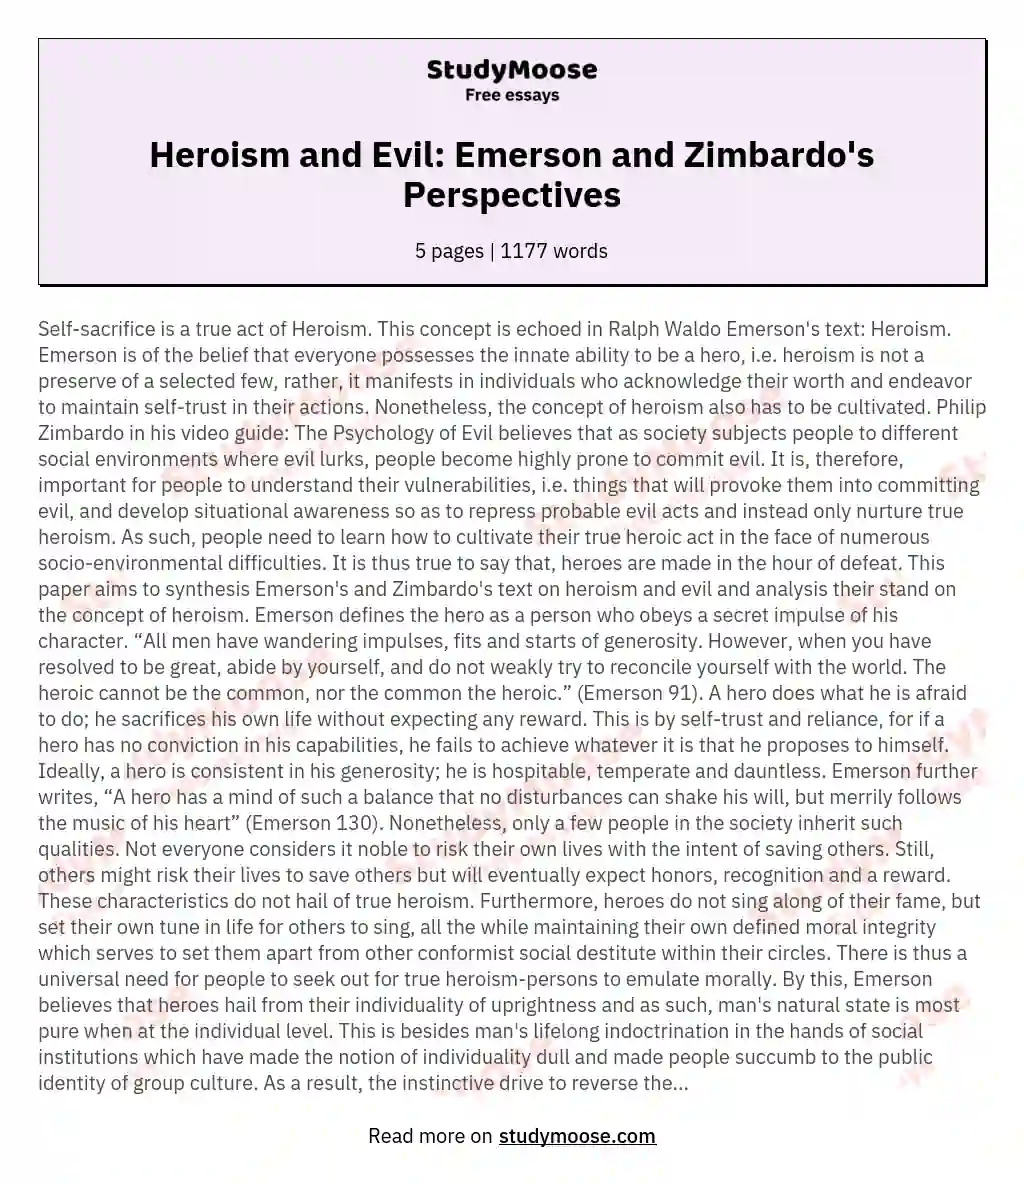 Opinions on Heroism and Evil in Ralph Waldo Emerson's Heroism and Philip Zimbardo's The Psychology of Evil